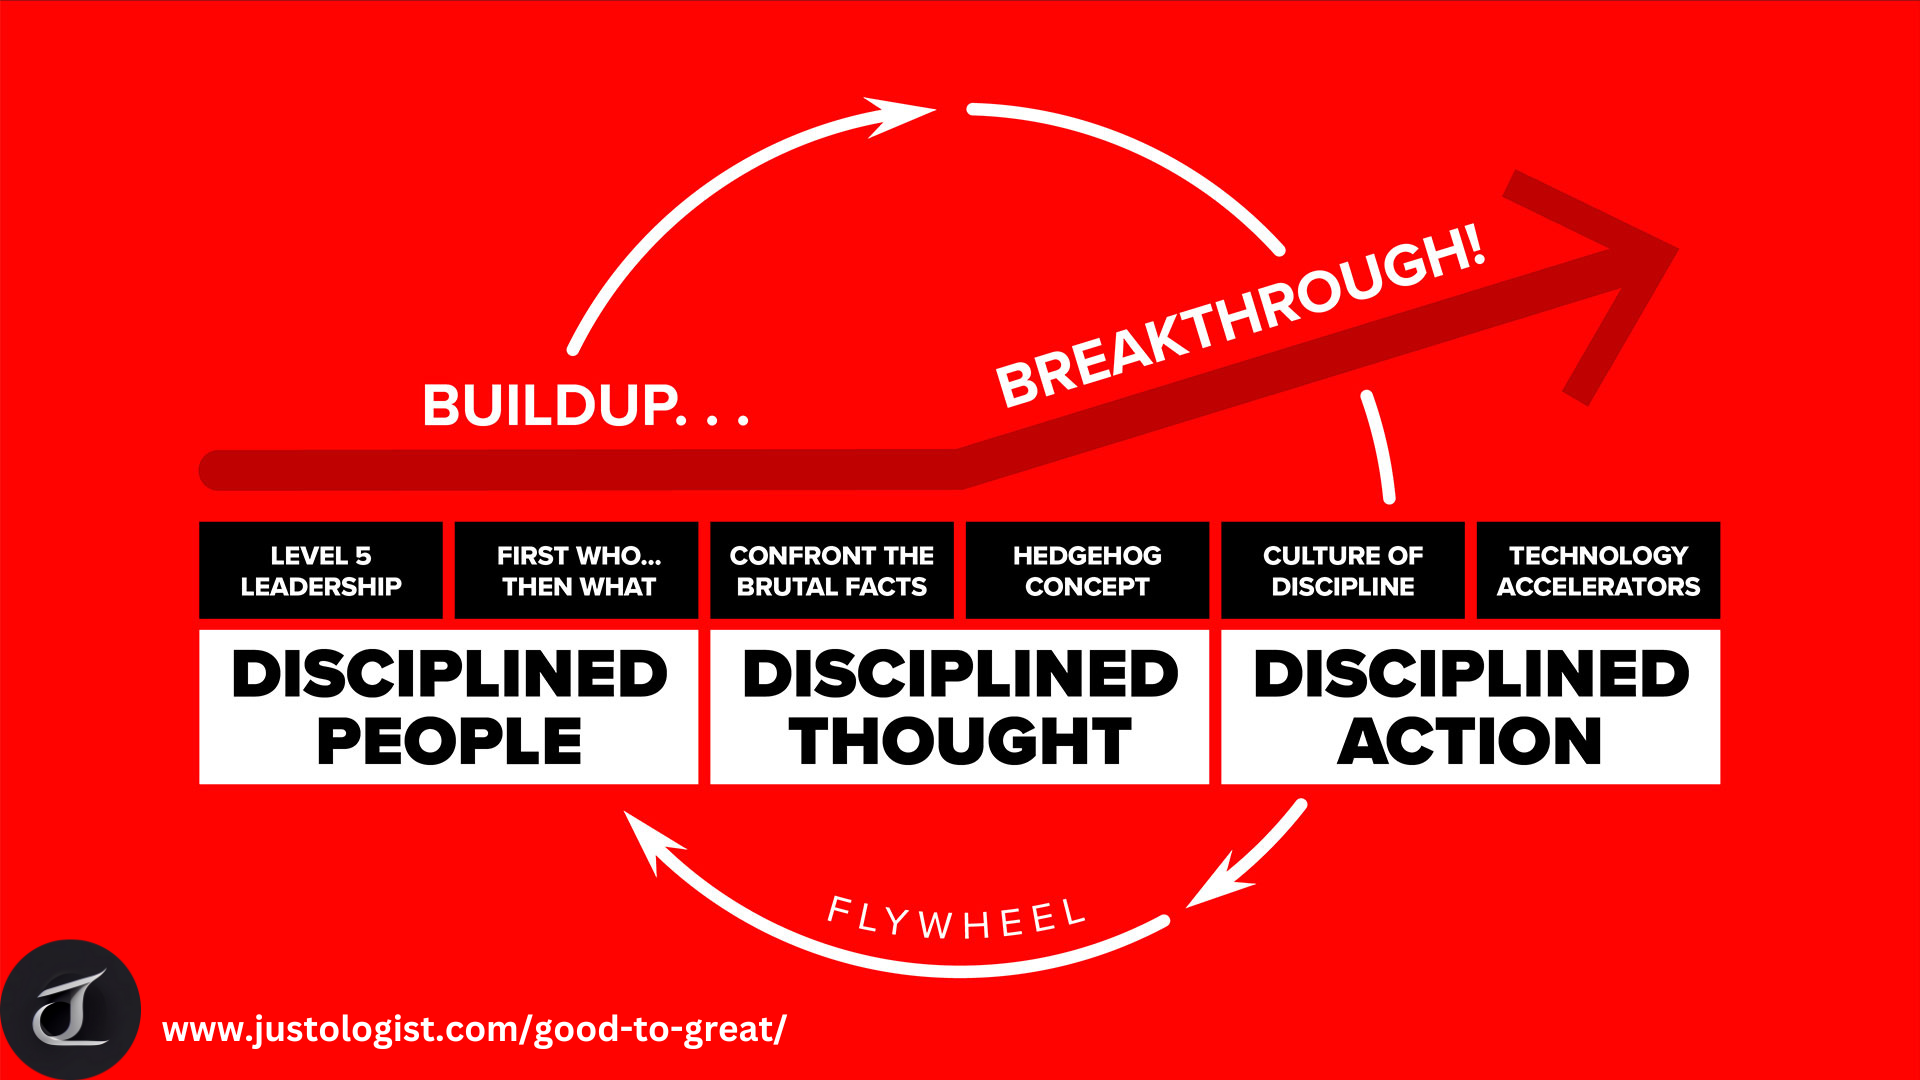 Good to Great Flywheel Visual Infographic, Jim Collins, Good to Great Visual Summary